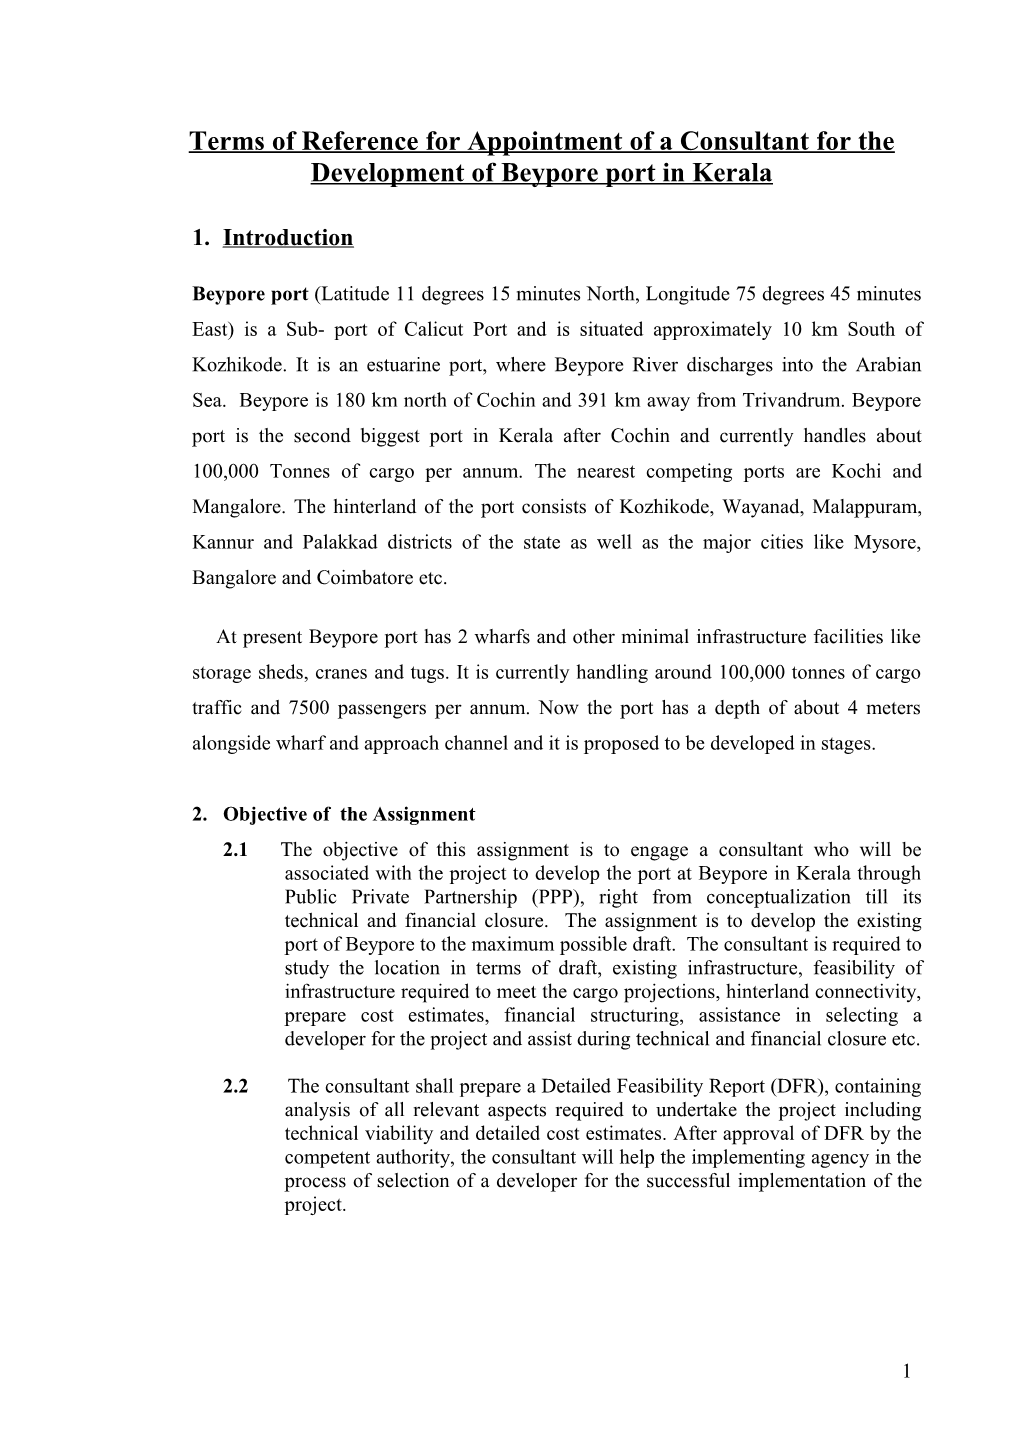 Draft Terms of Reference for Appointment of a Consultant for Development of a Modern Deep